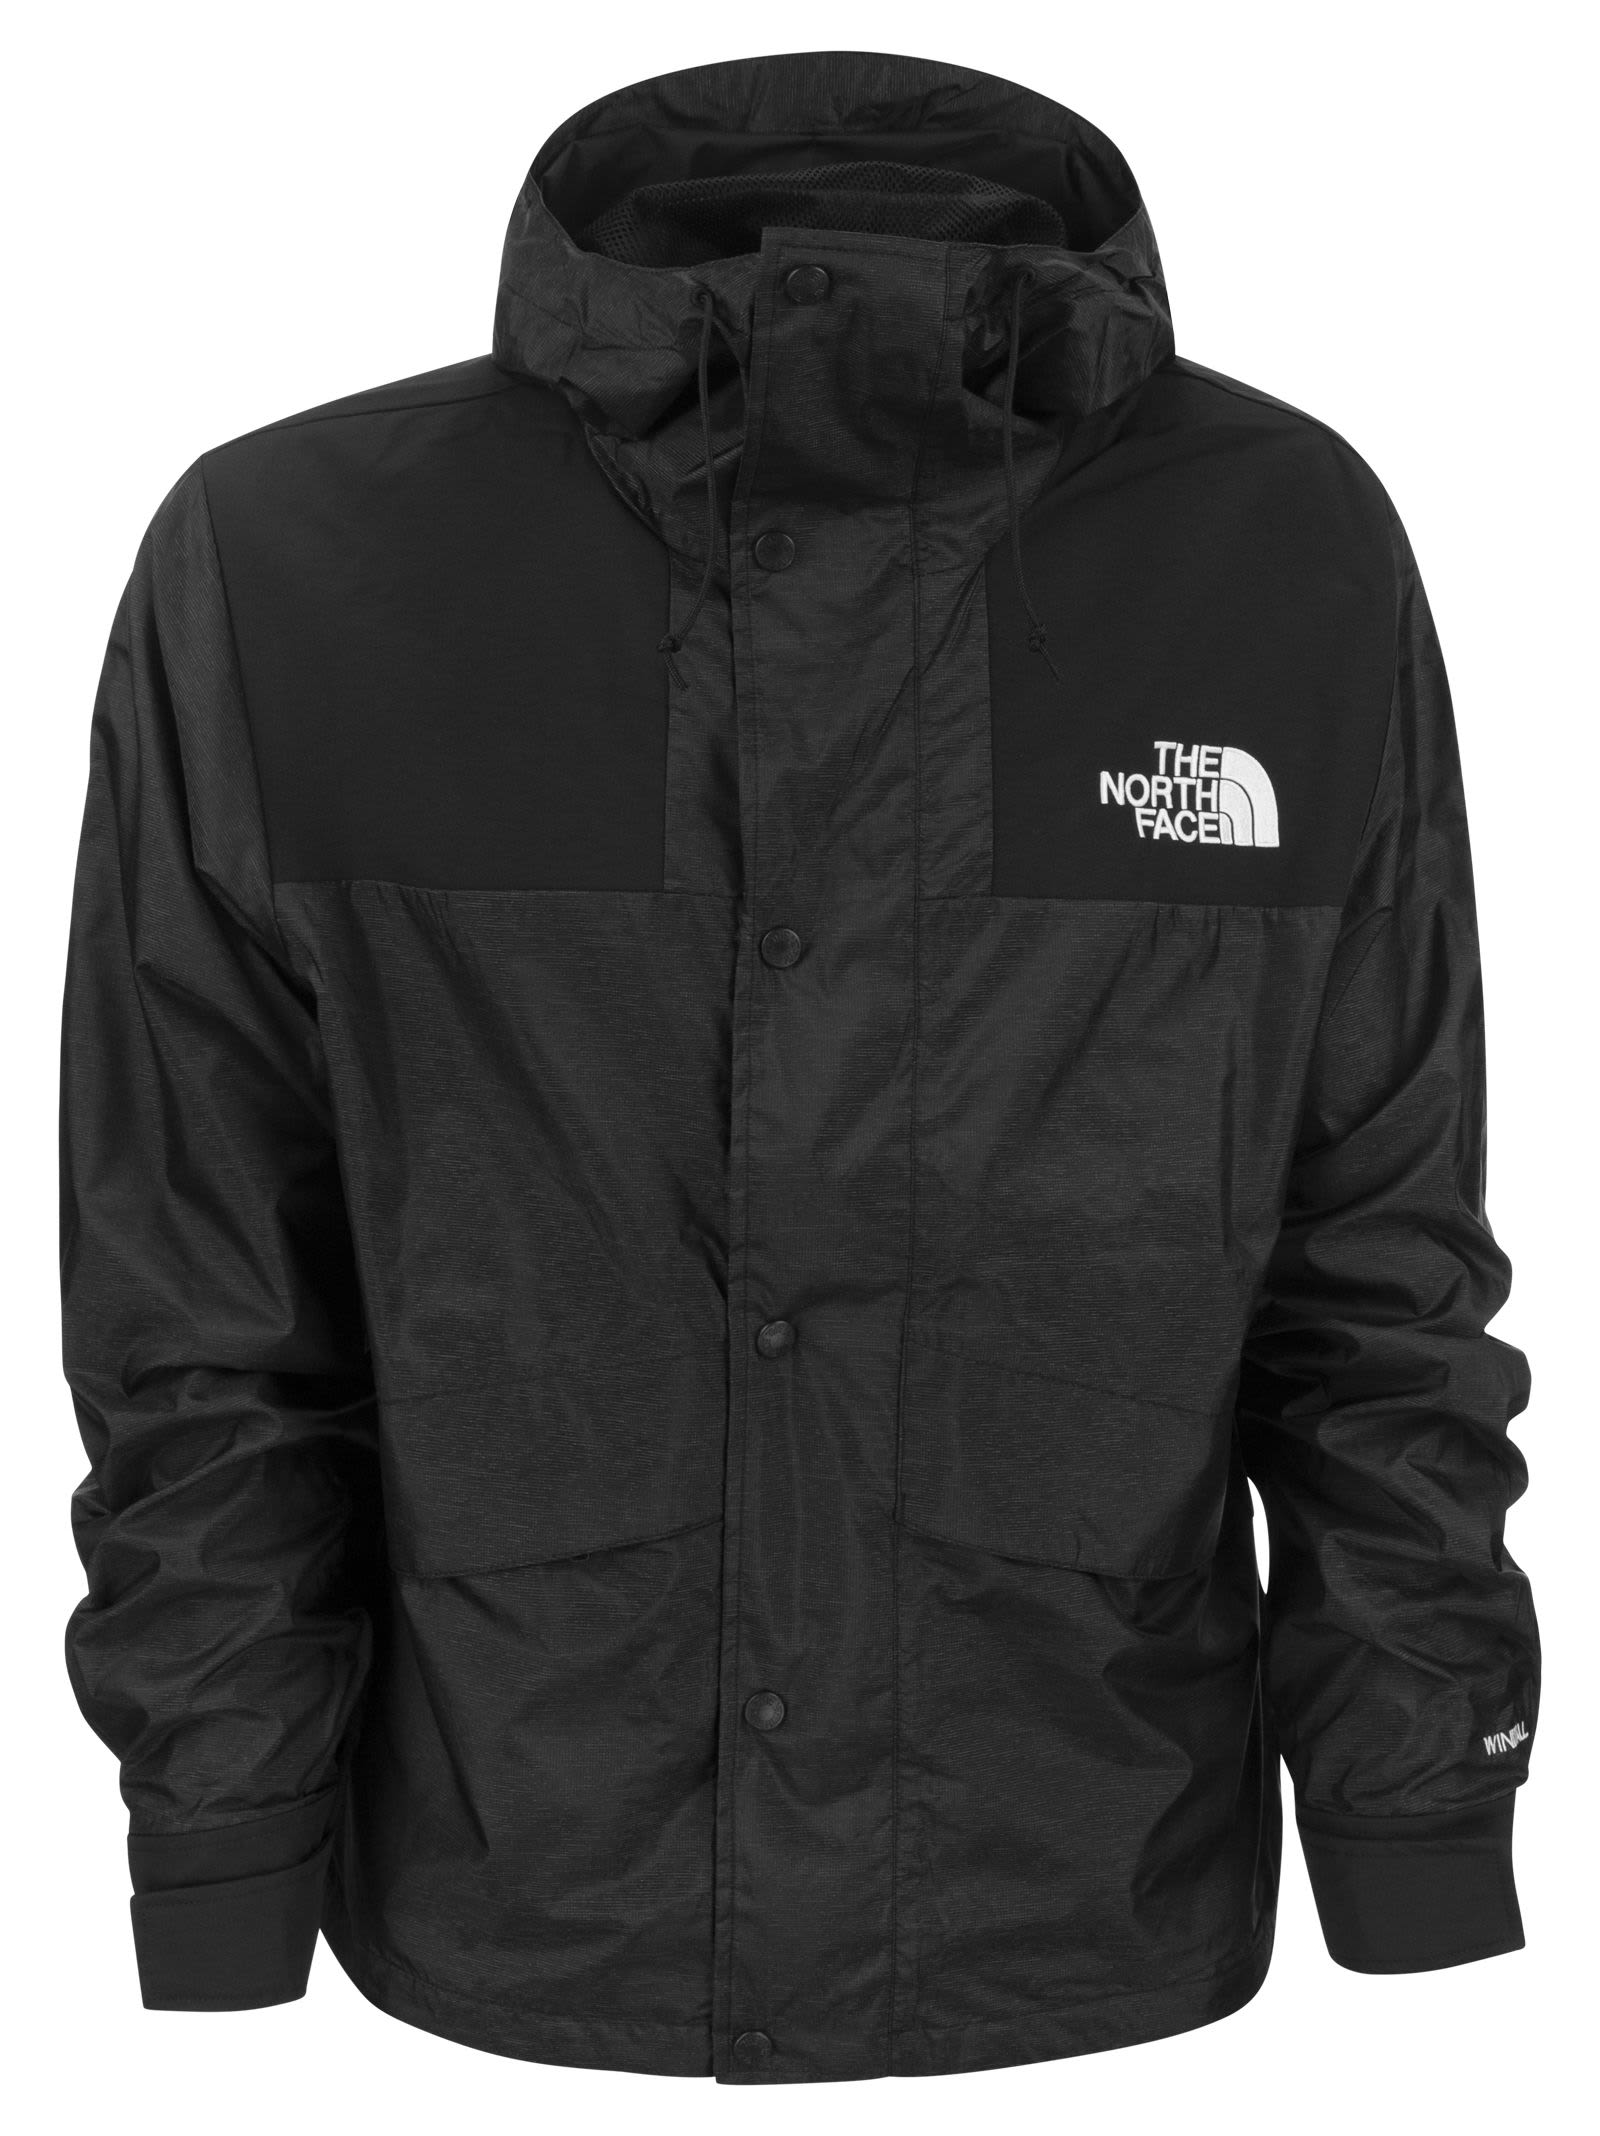 THE NORTH FACE OUTLINE - LIGHT NYLON JACKET